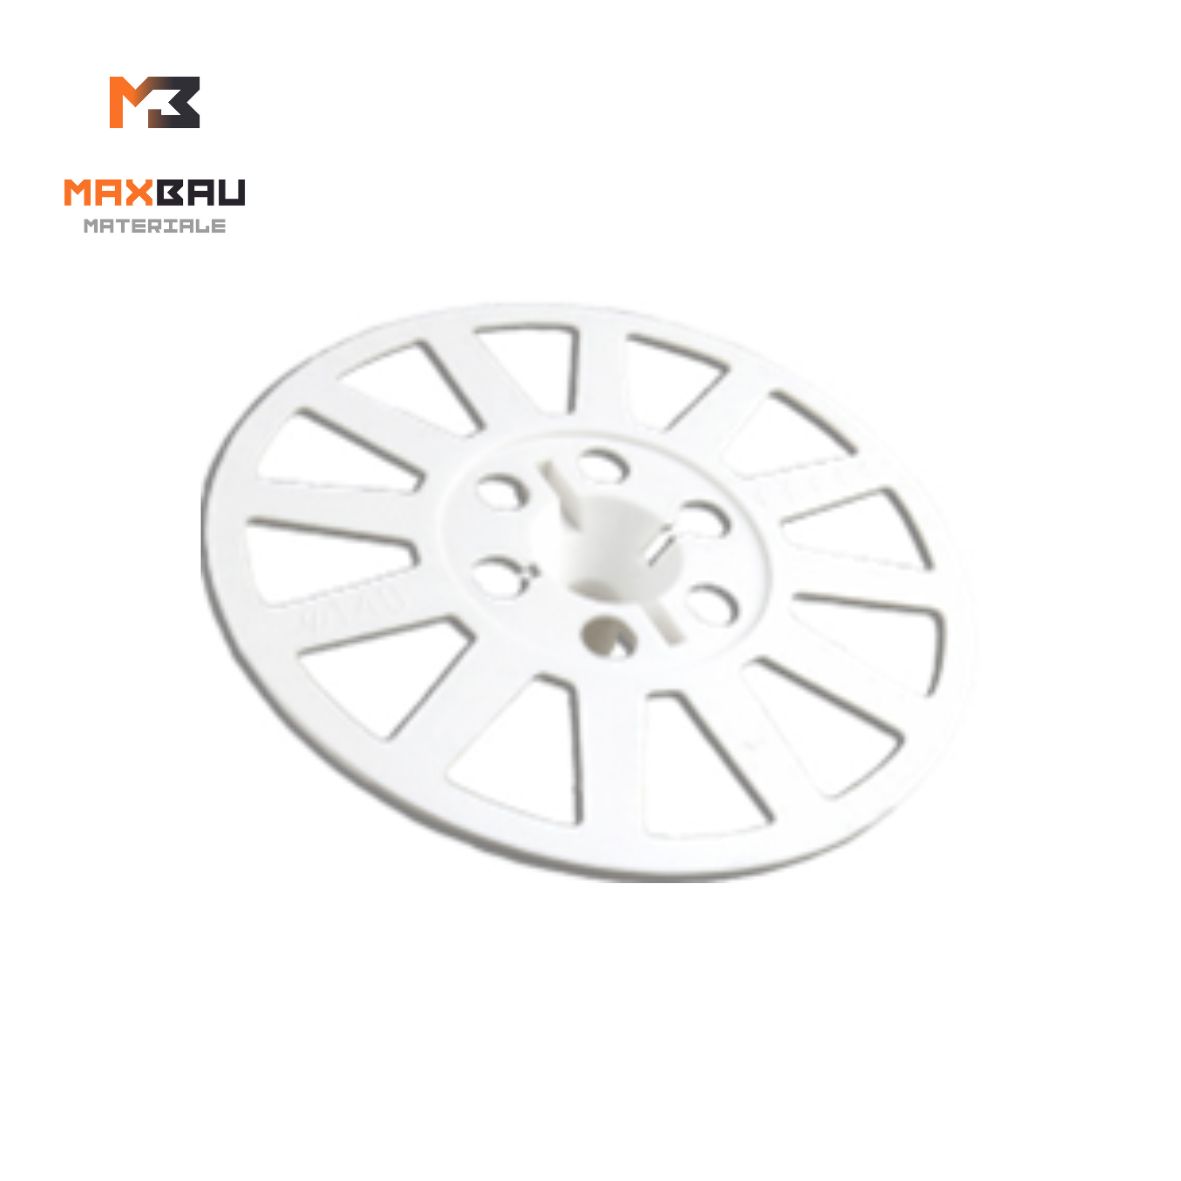 Thermosystem Accessories - Plastic rosette for fixing the Maxbau basaltic wool 140 mm, 300 pcs/carton, https:maxbau.ro